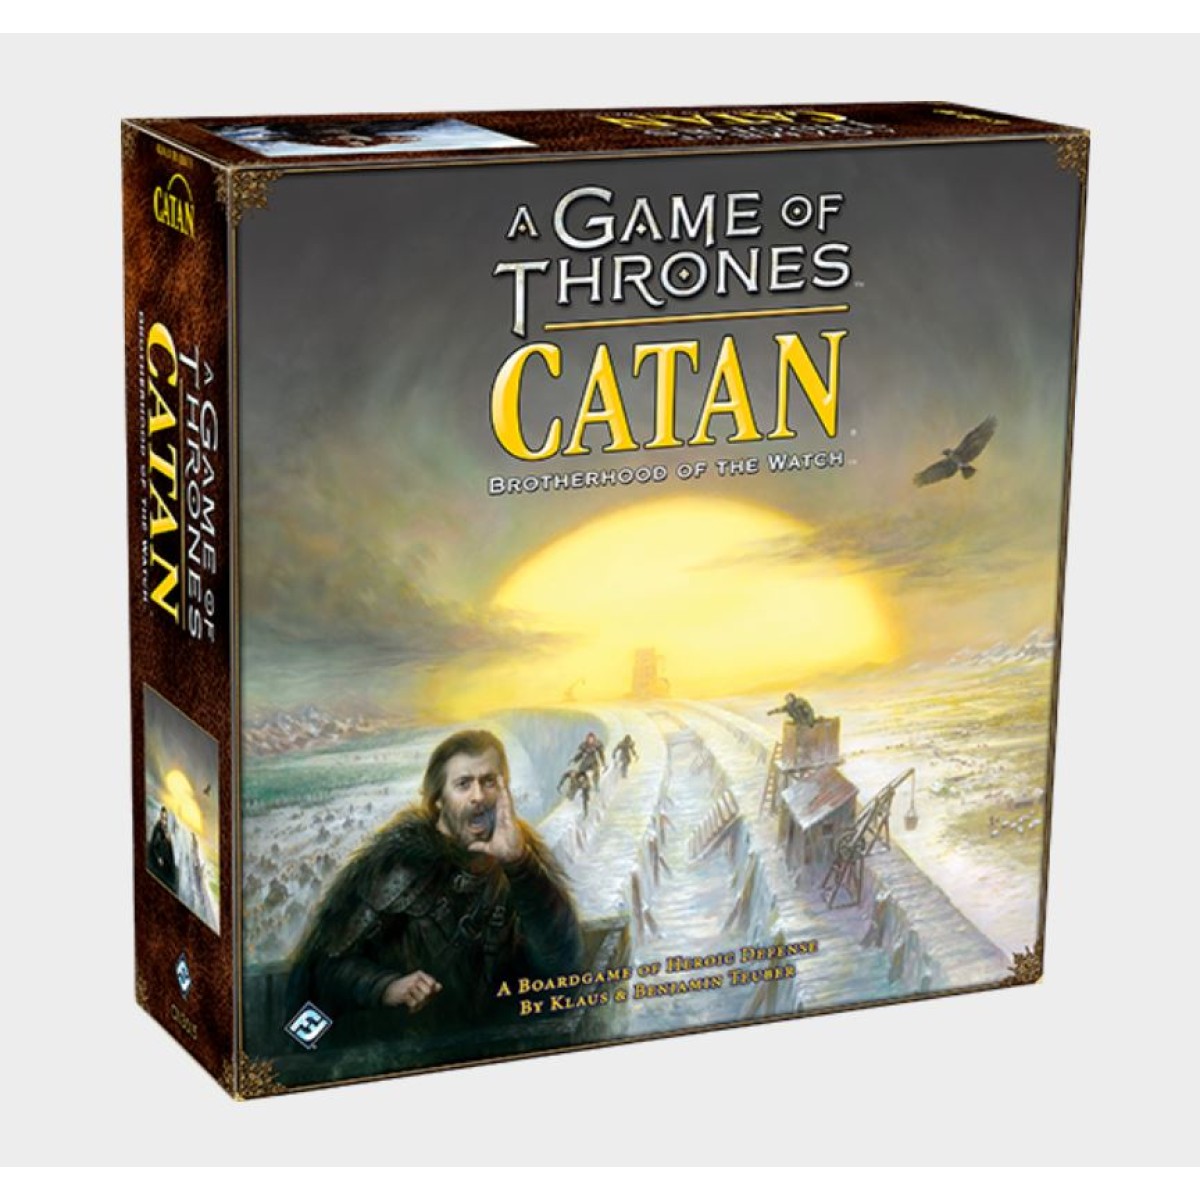 Catan - A Game of Thrones Edition - Brotherhood of the Watch